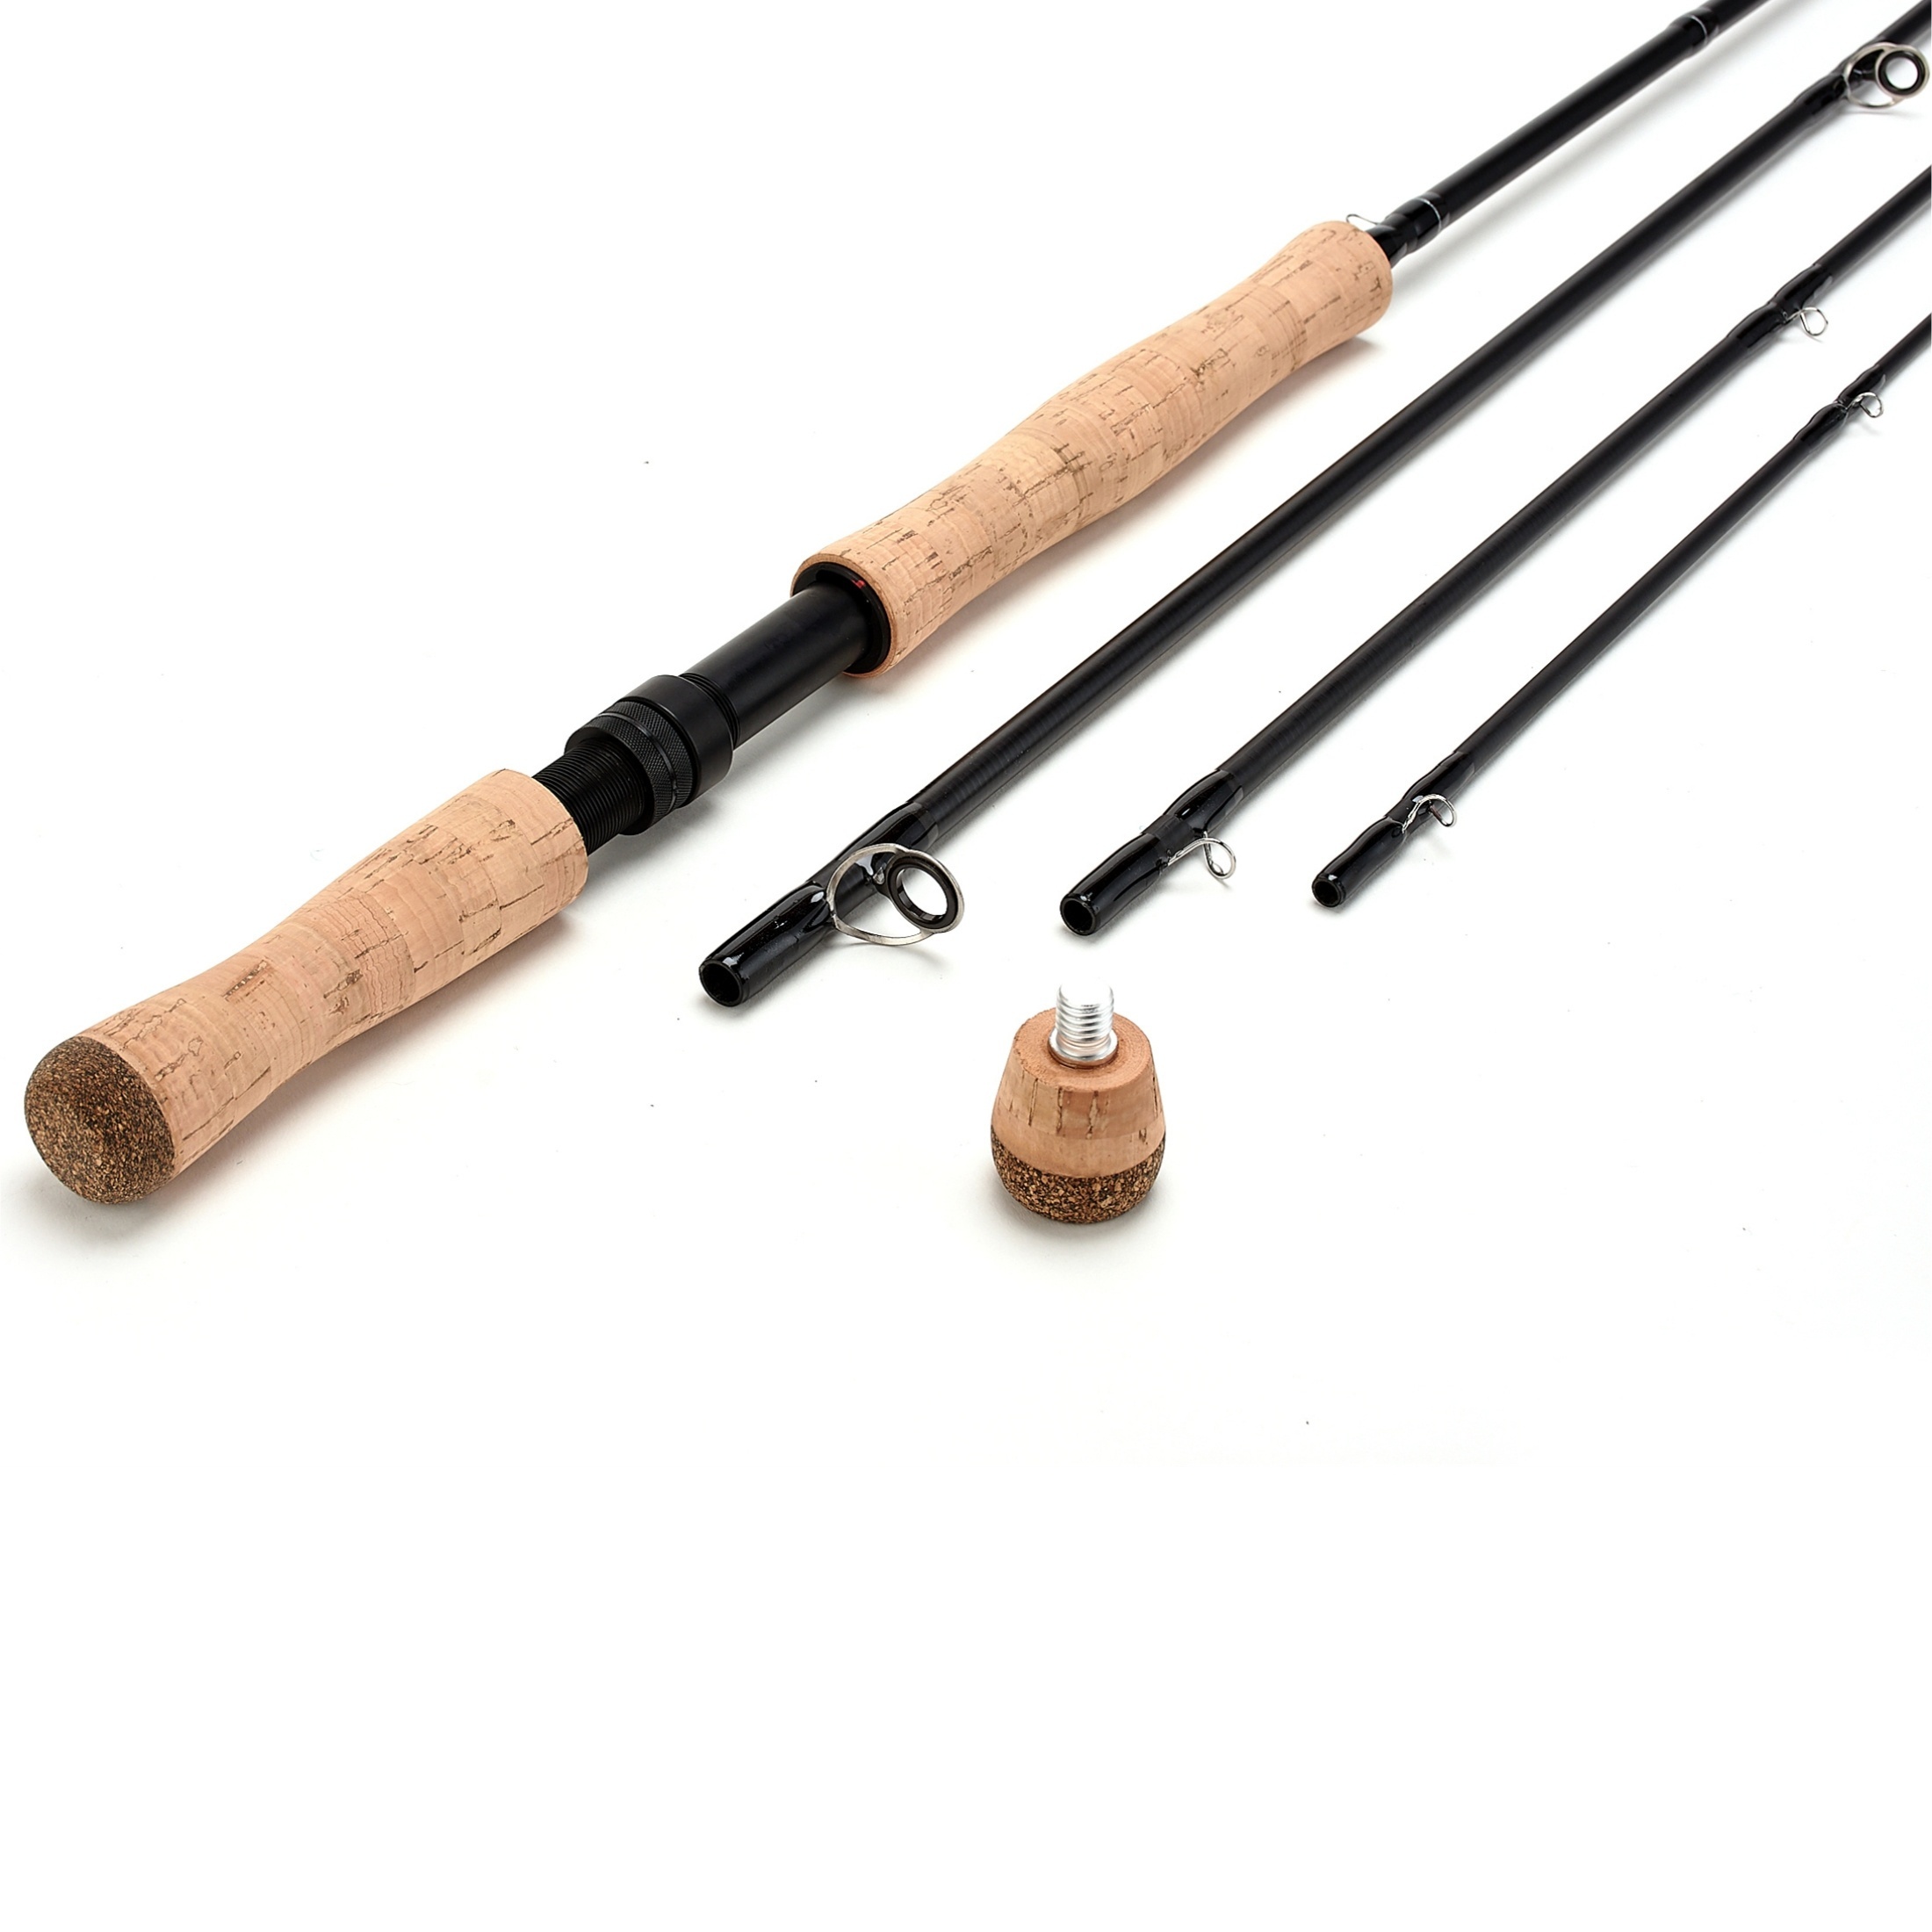 10 Feet 9 Inches 7wt 8wt Switch Rod, Extra Handle Cork Handles Fly Fishing  Rod, 4 Pieces Carbon Fiber Sections For Freshwater Trout Lake Fishing